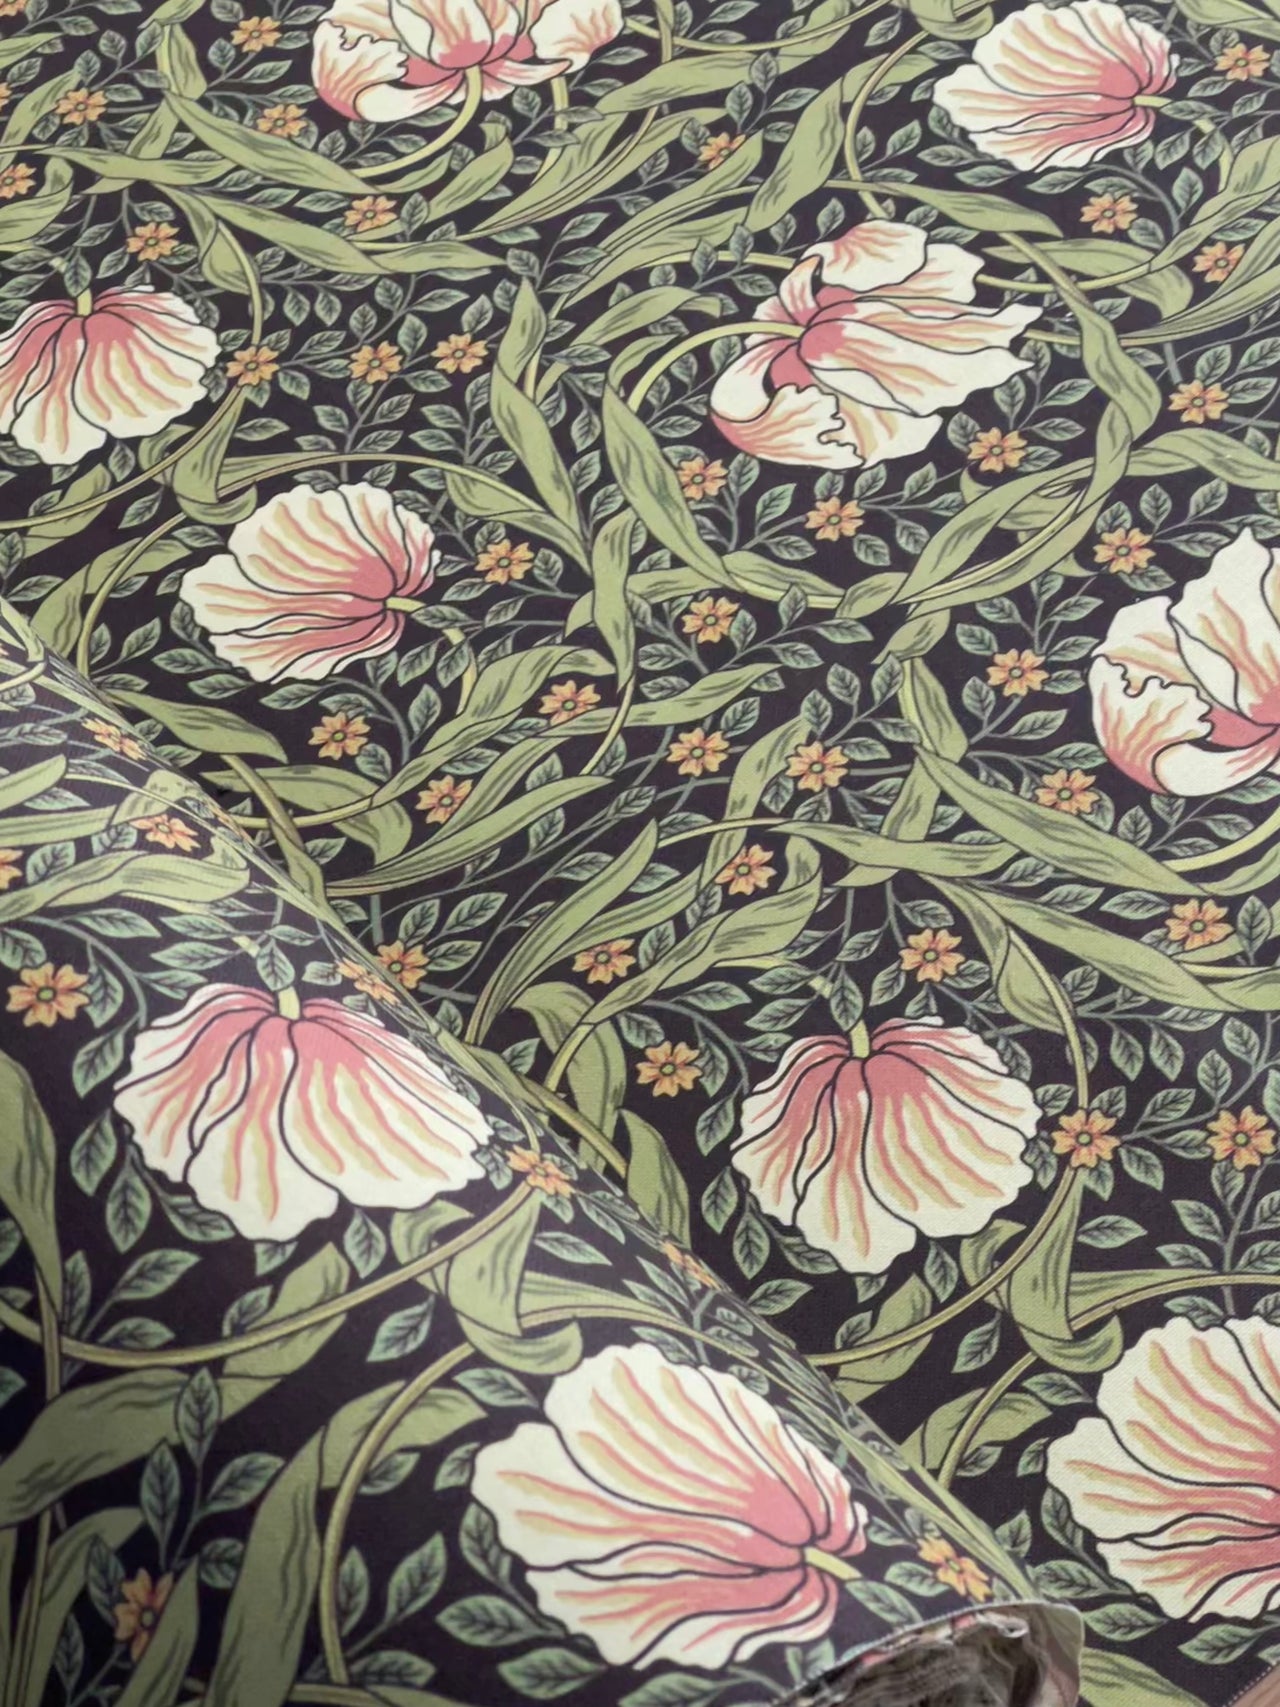 William Morris Pimpernel Roman Blinds - Custom Made to Measure with Botanical Pattern